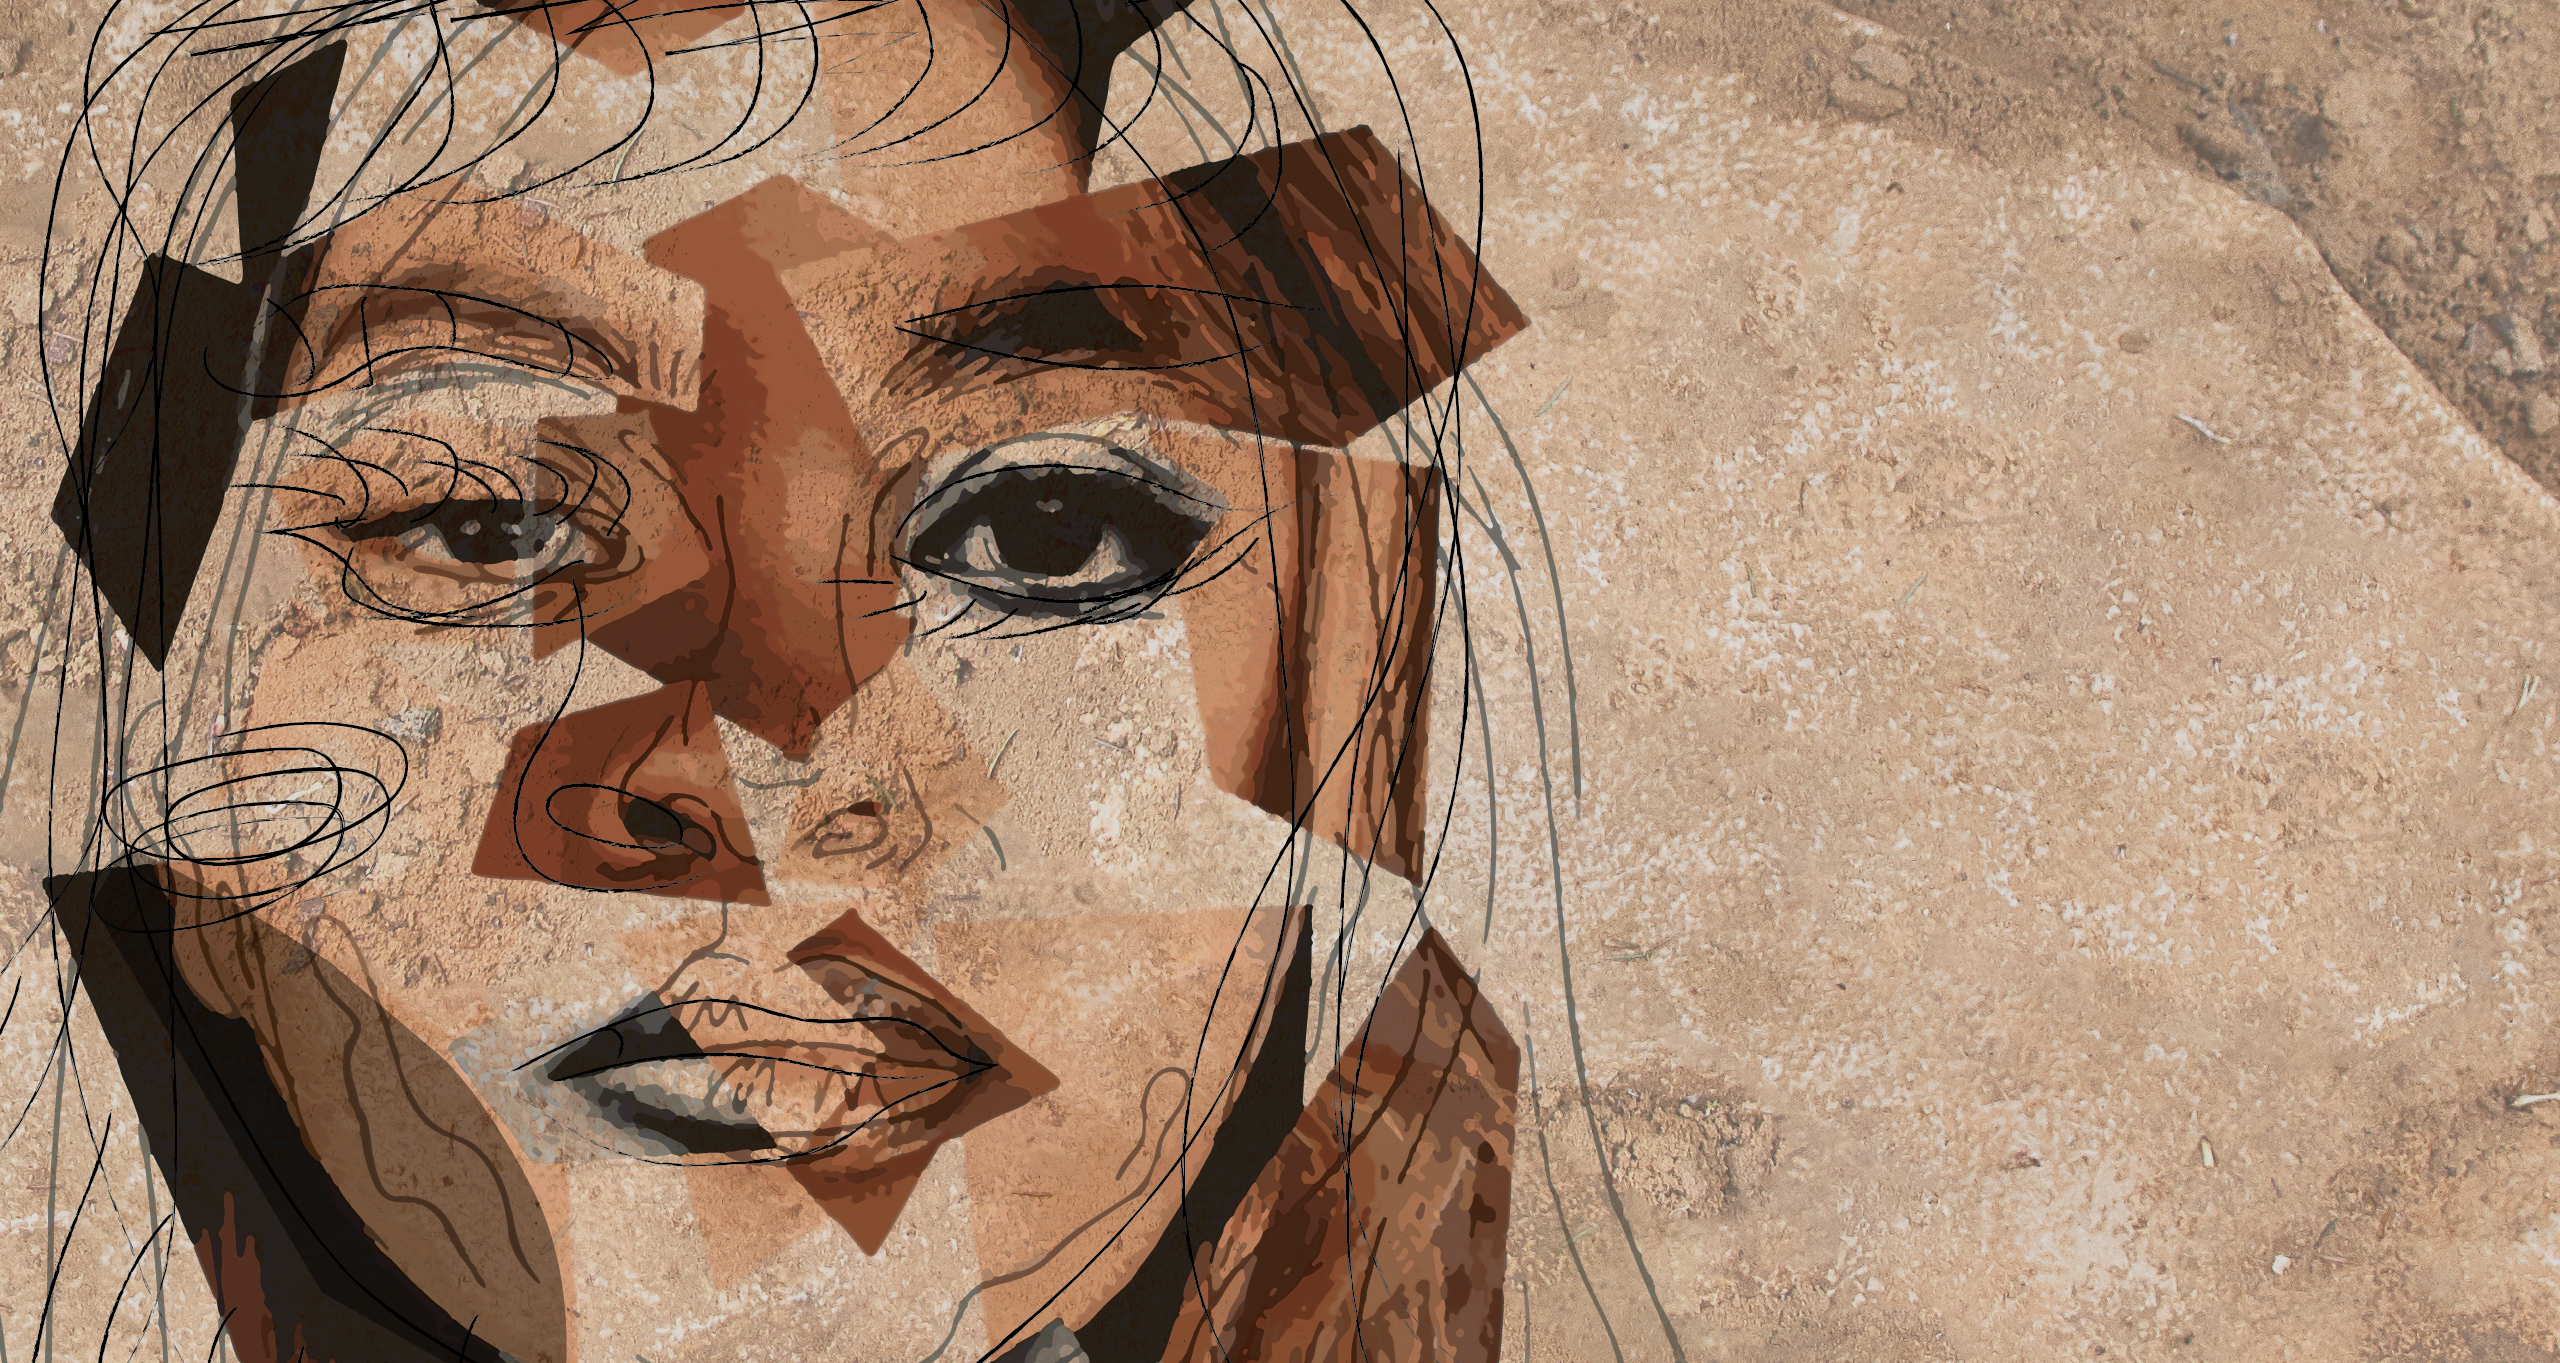 Abstract image of person with fragmented watercolour brown, black and sandy hues with accented line segments outlining facial features and hair lines on a sandy stone background texture.